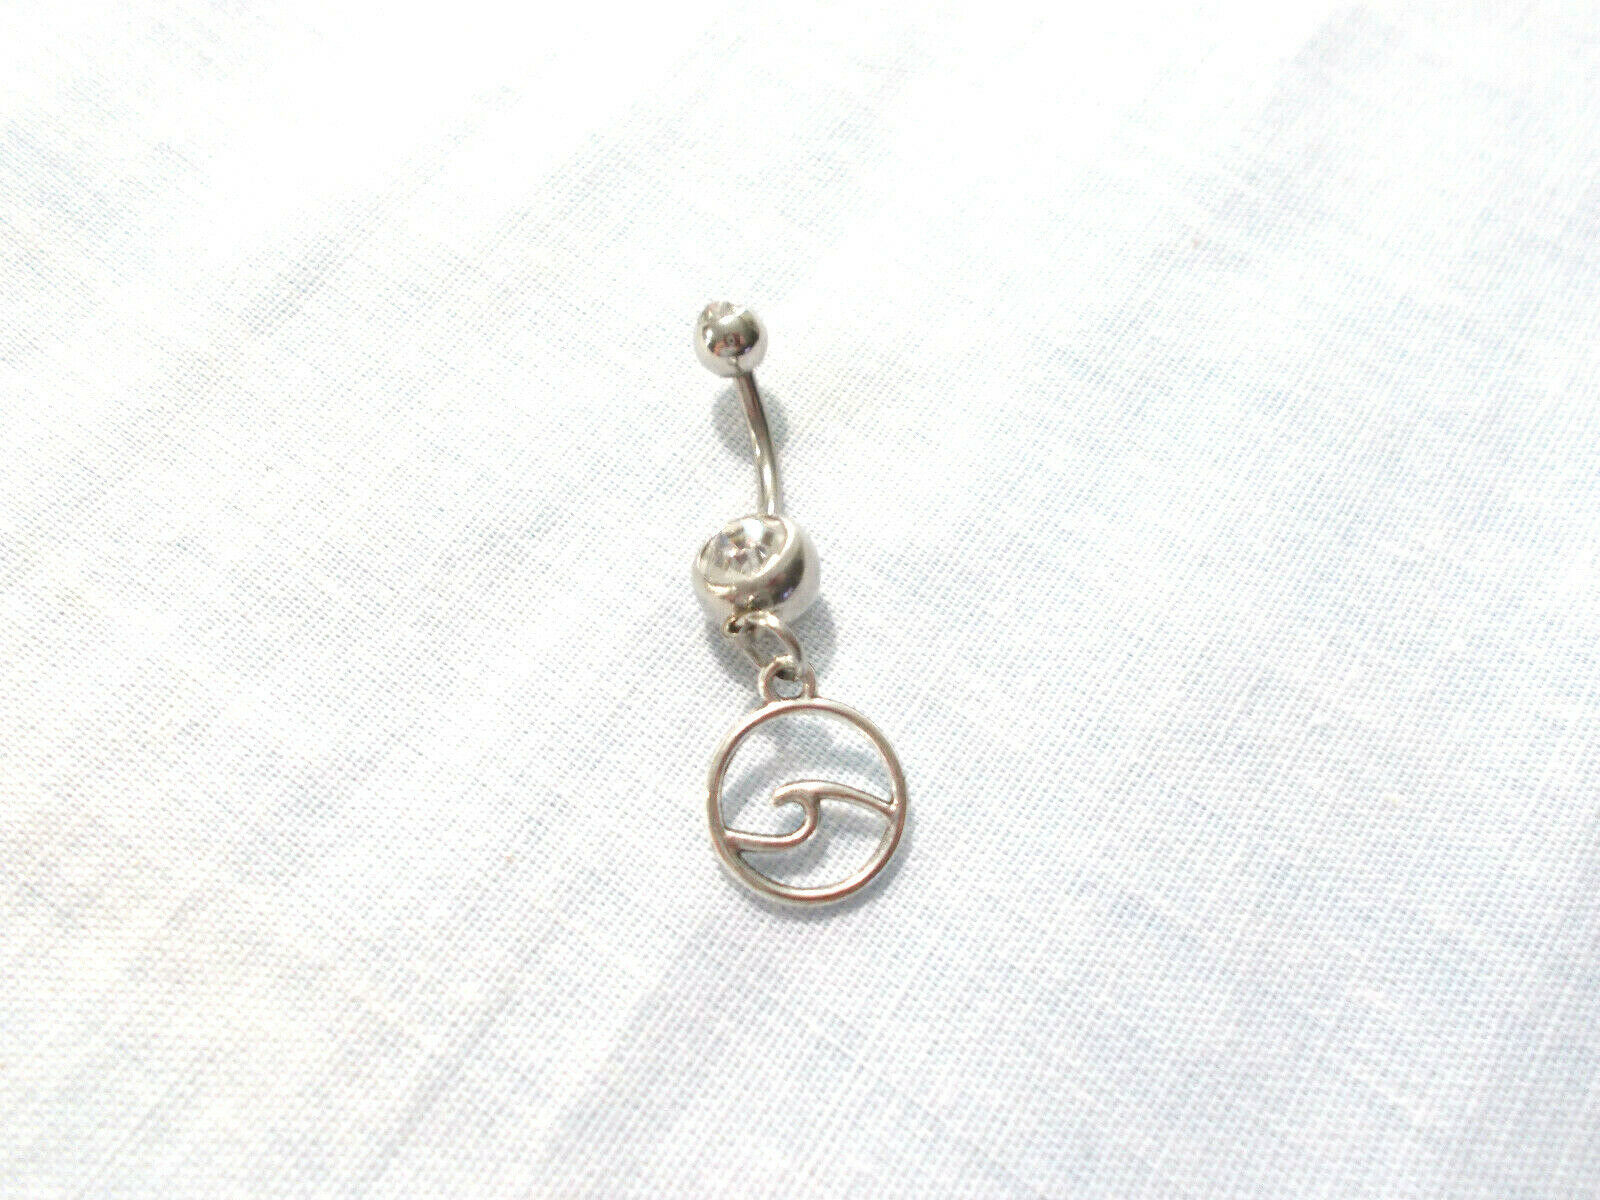 OCEAN WAVE ROUND WATER SYMBOL CHARM ON 14g CLEAR CZ BELLY RING BARBELL